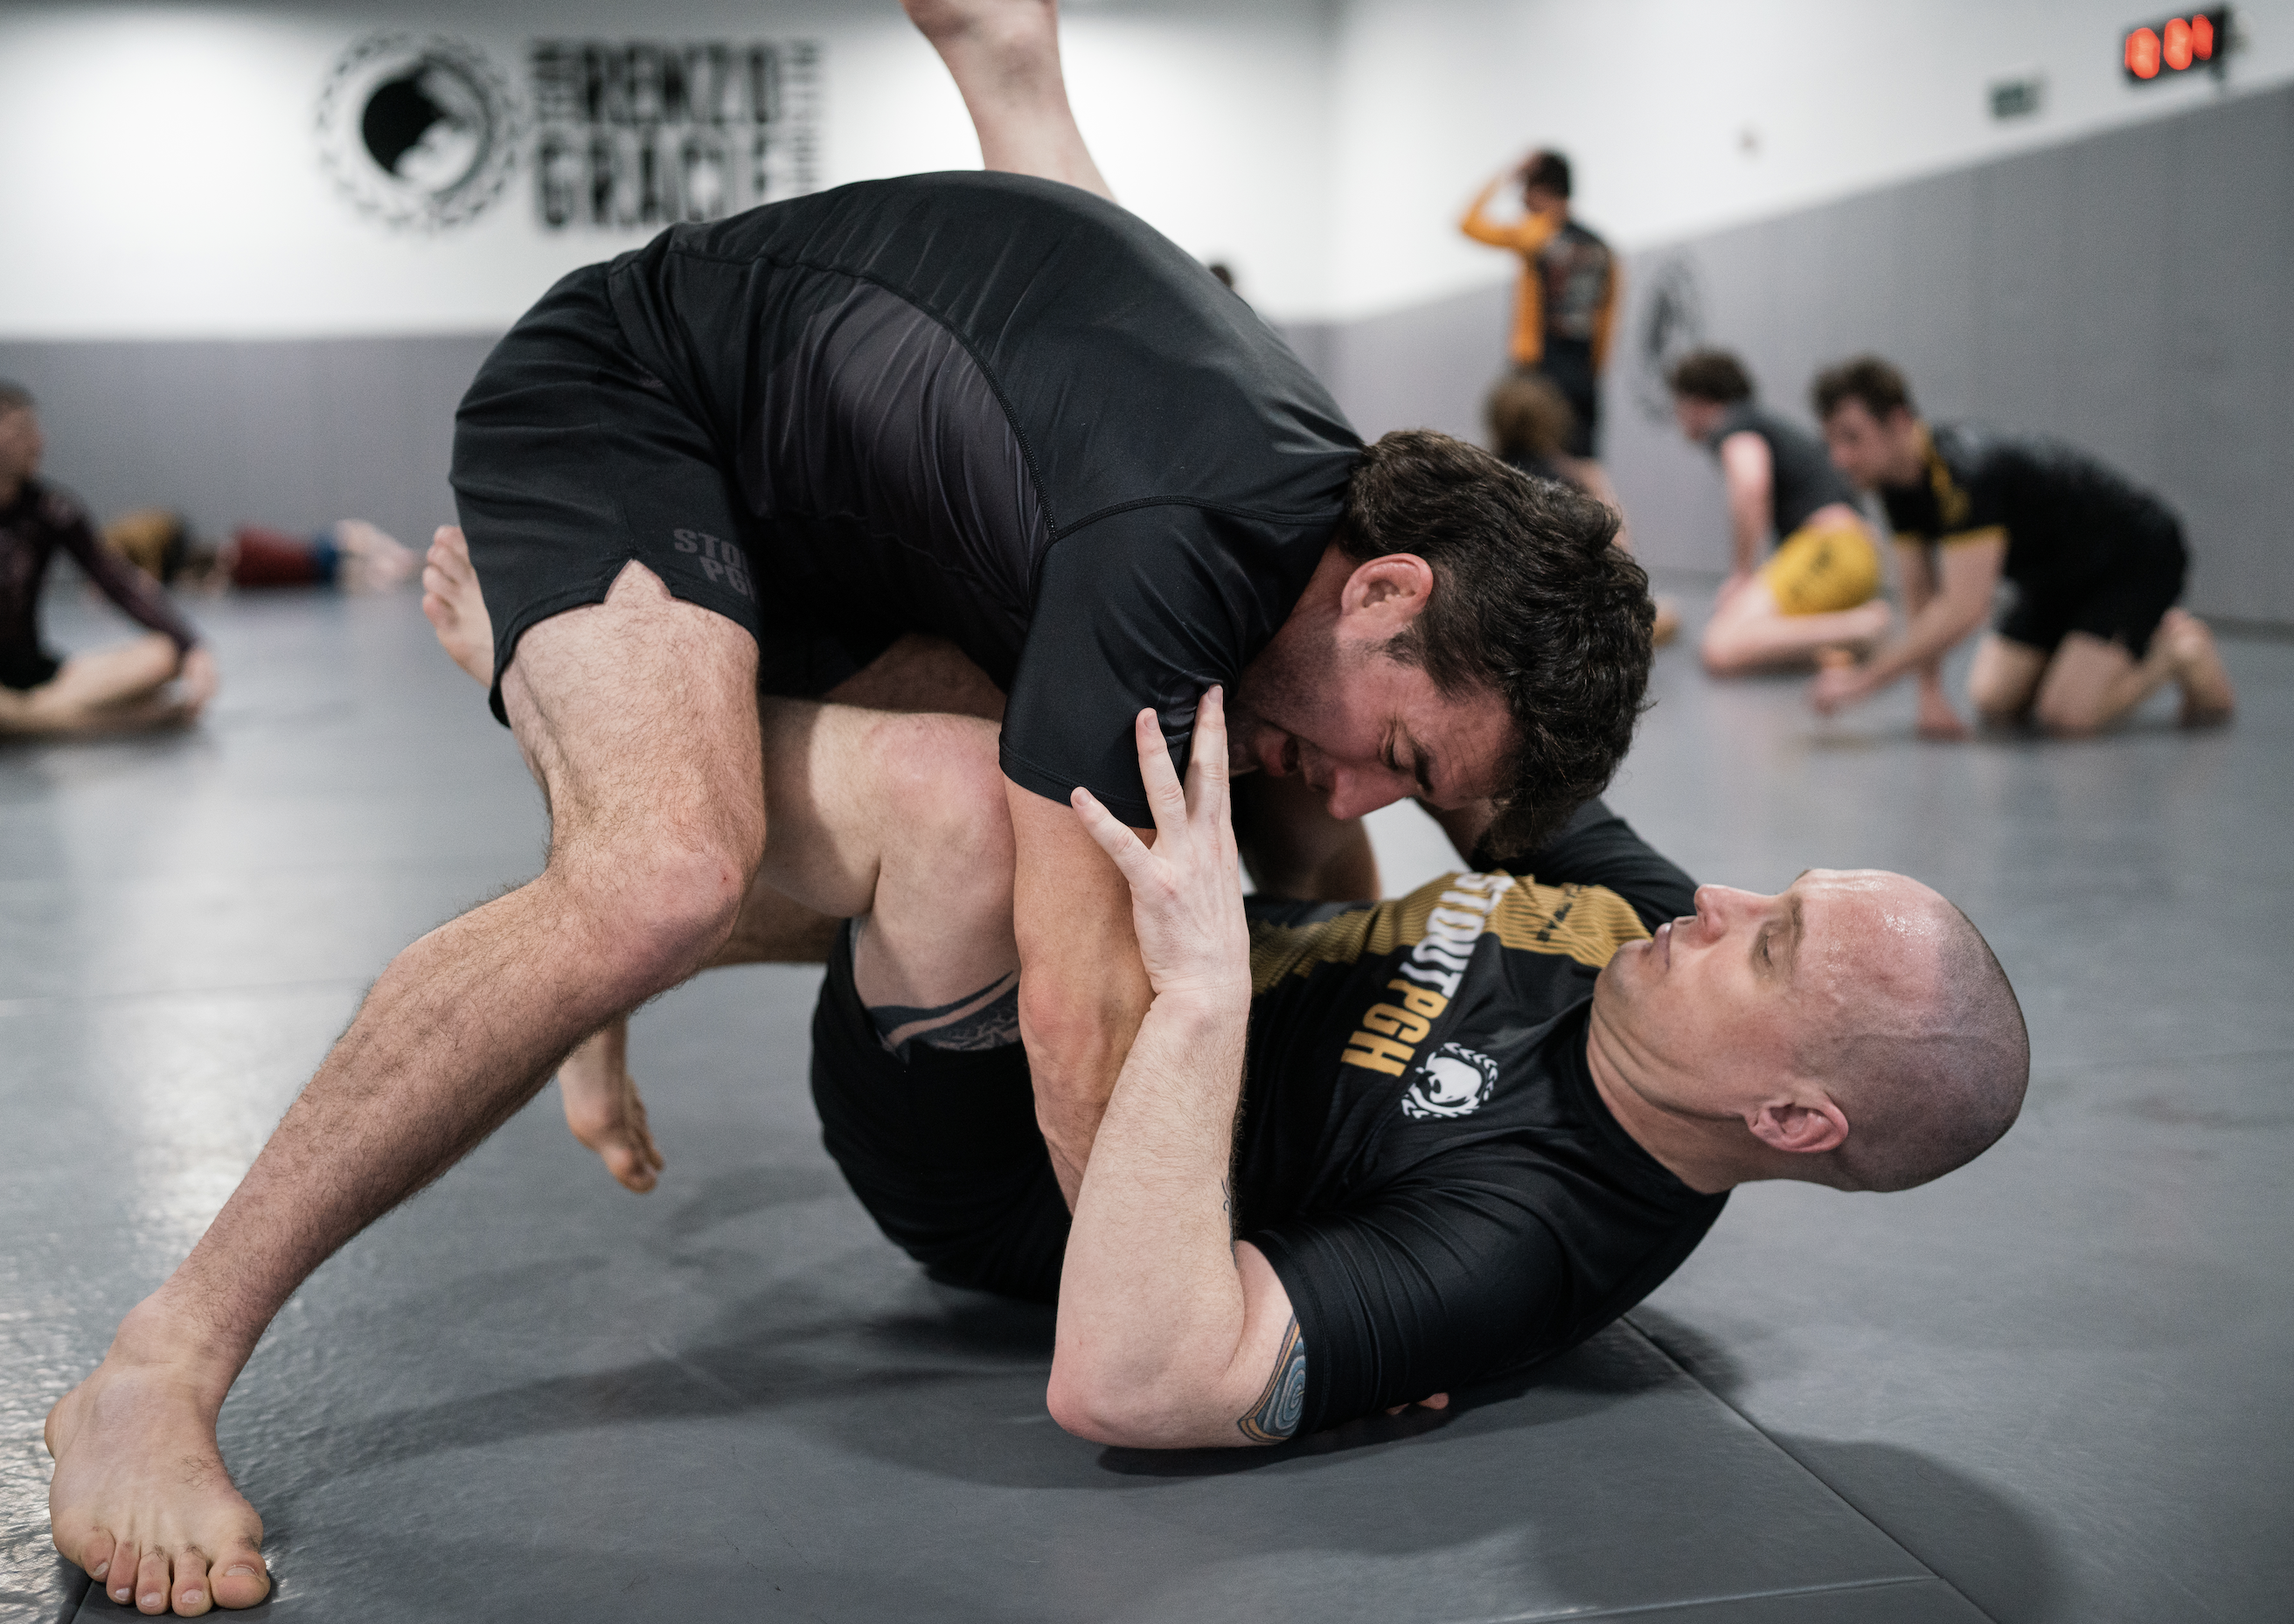 My Take on the “Organic” Learning Approach In Combat Sports